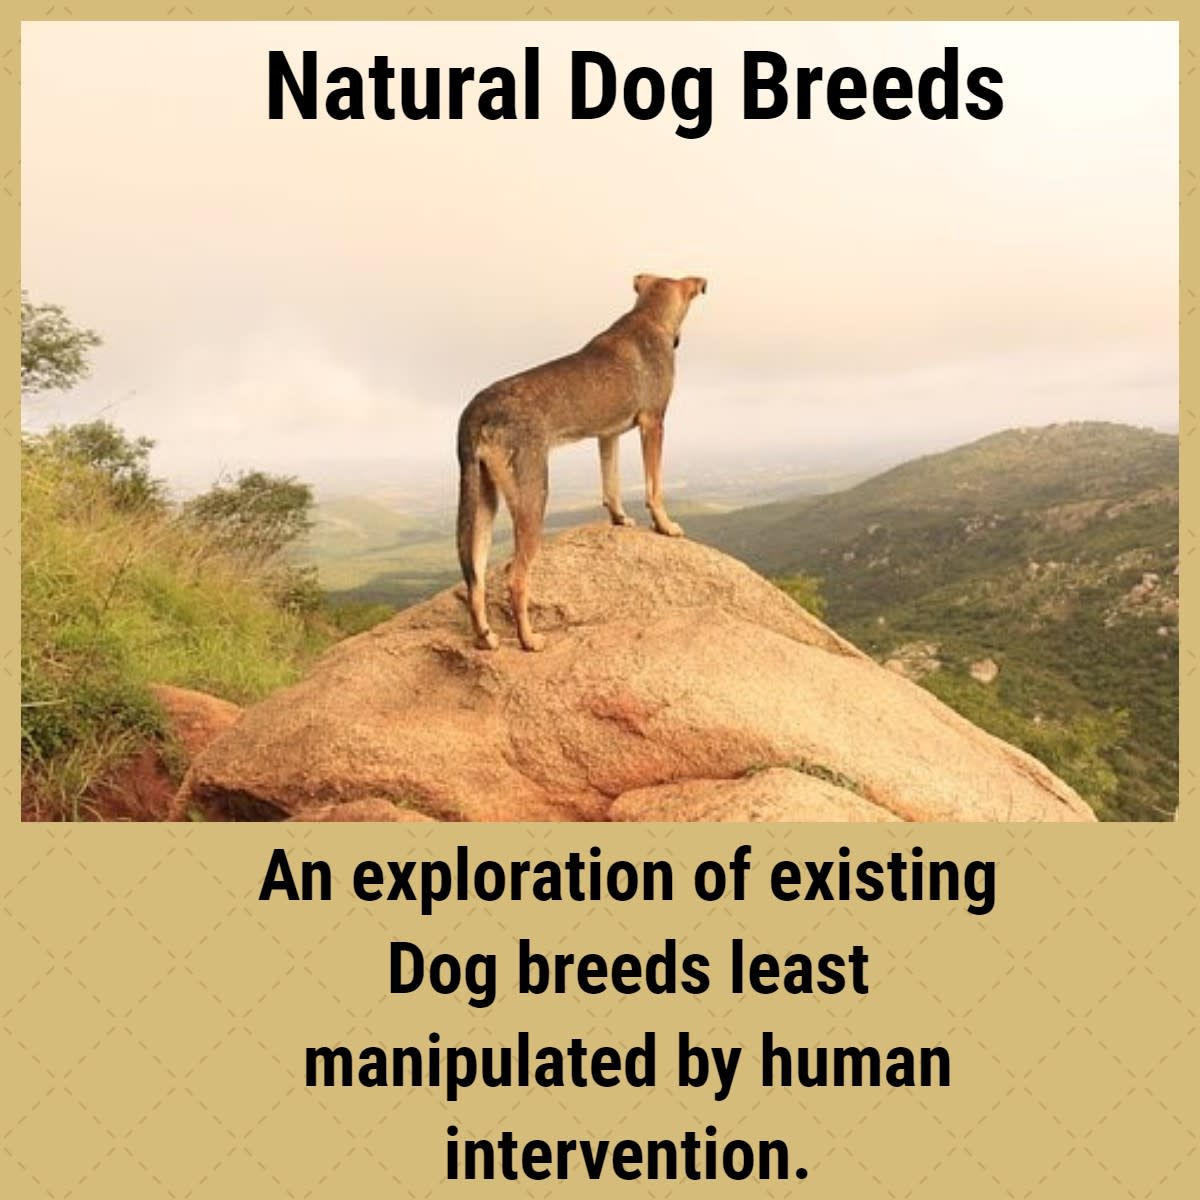 As most know, many dogs have been selectively bred. But what about those dogs that are closest to their natural breed? 